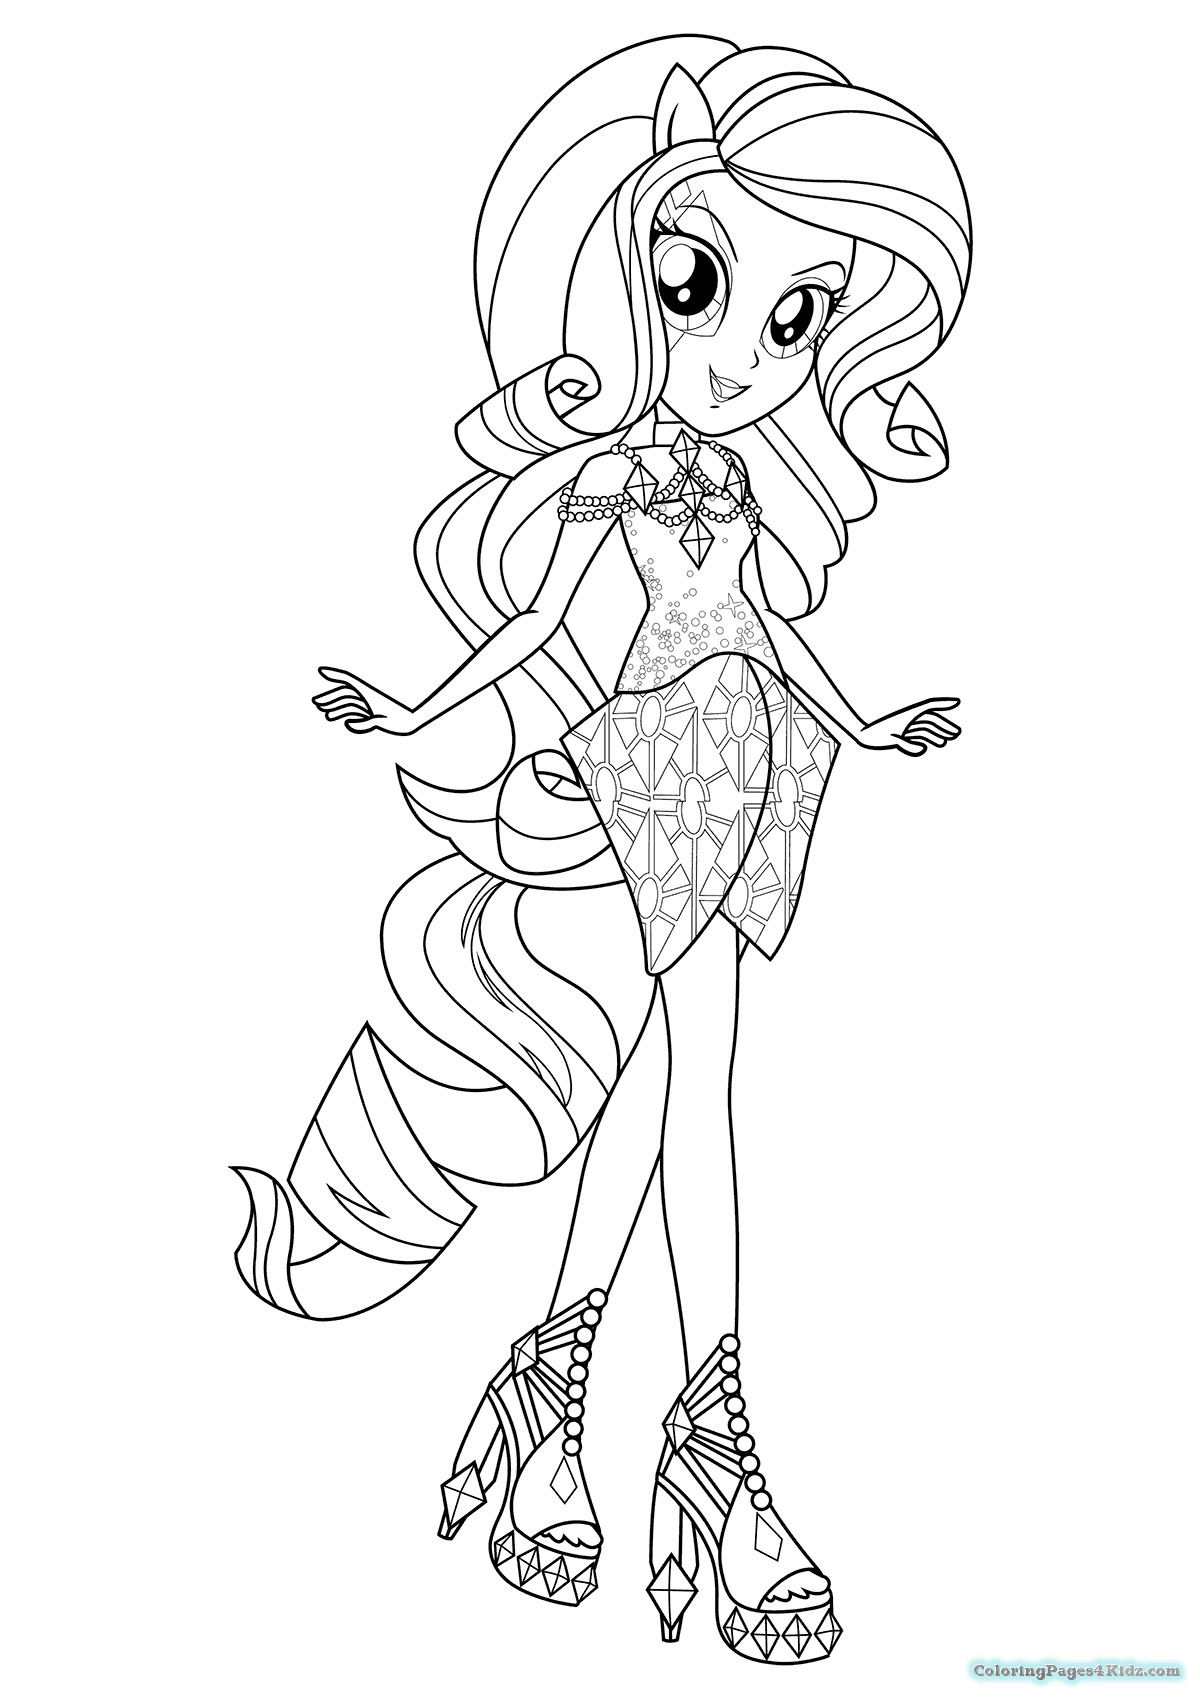 Equestria Girls Coloring Pages
 Equestria Girls Rainbow Rocks Coloring Pages